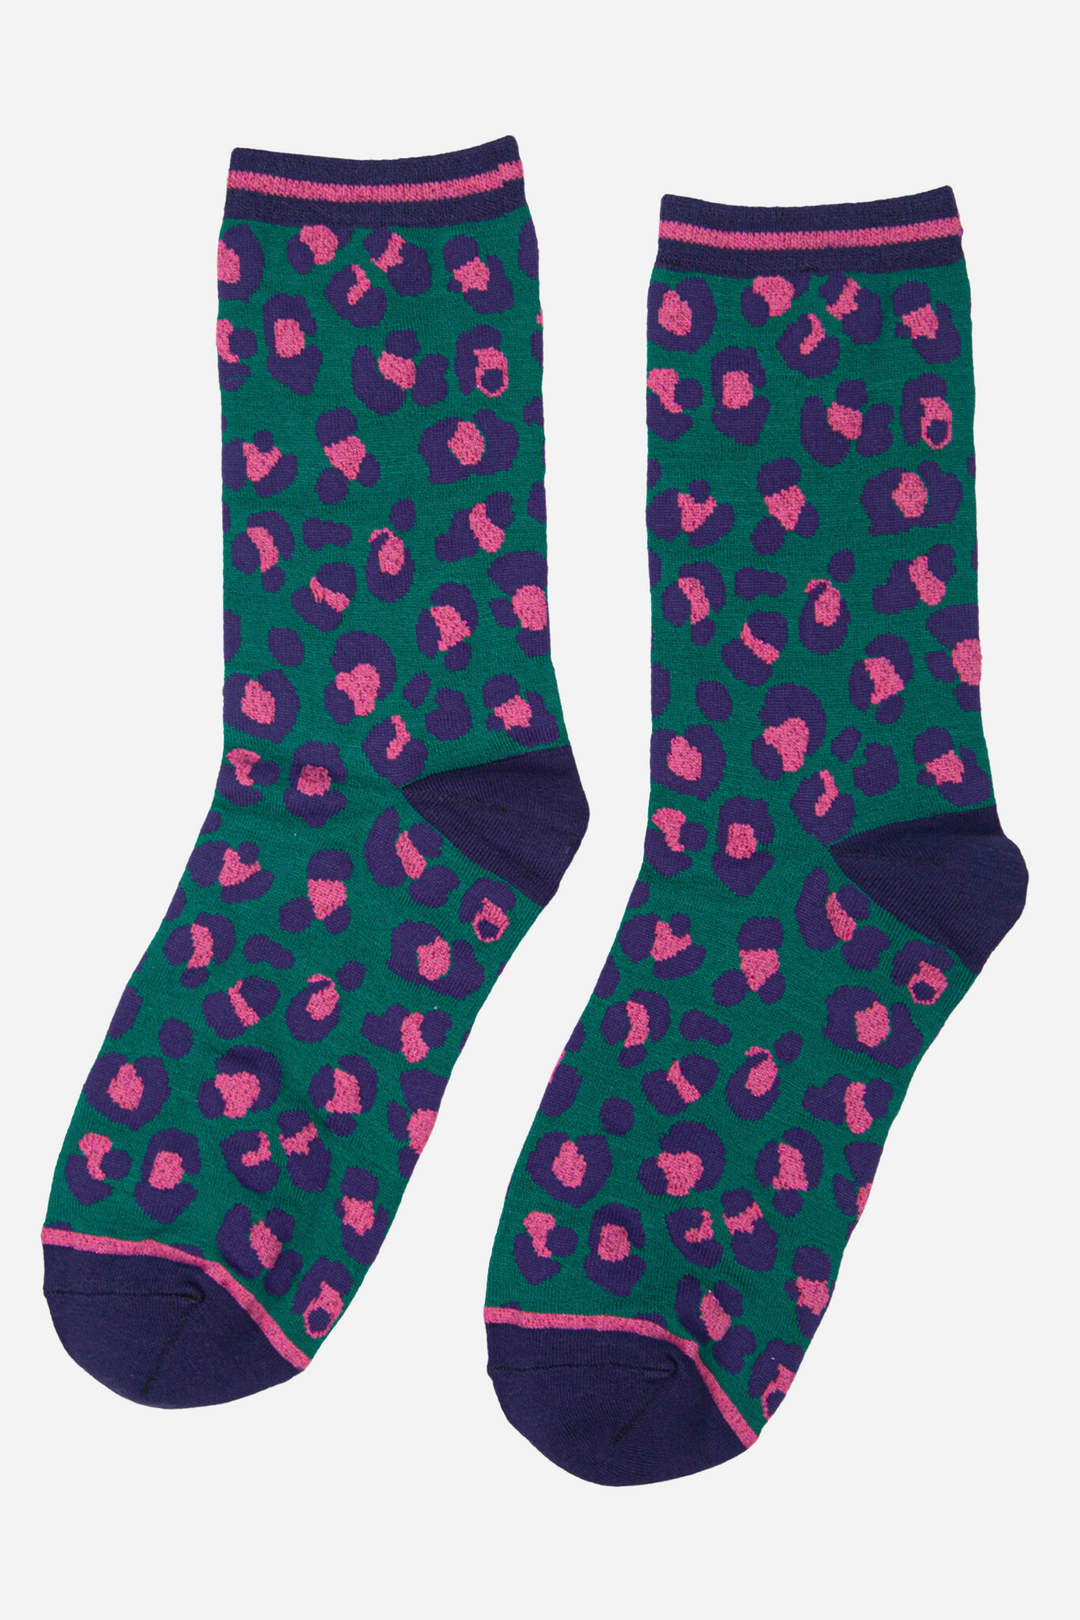 green and pink animal print pattern socks with a pink striped cuff and toe 